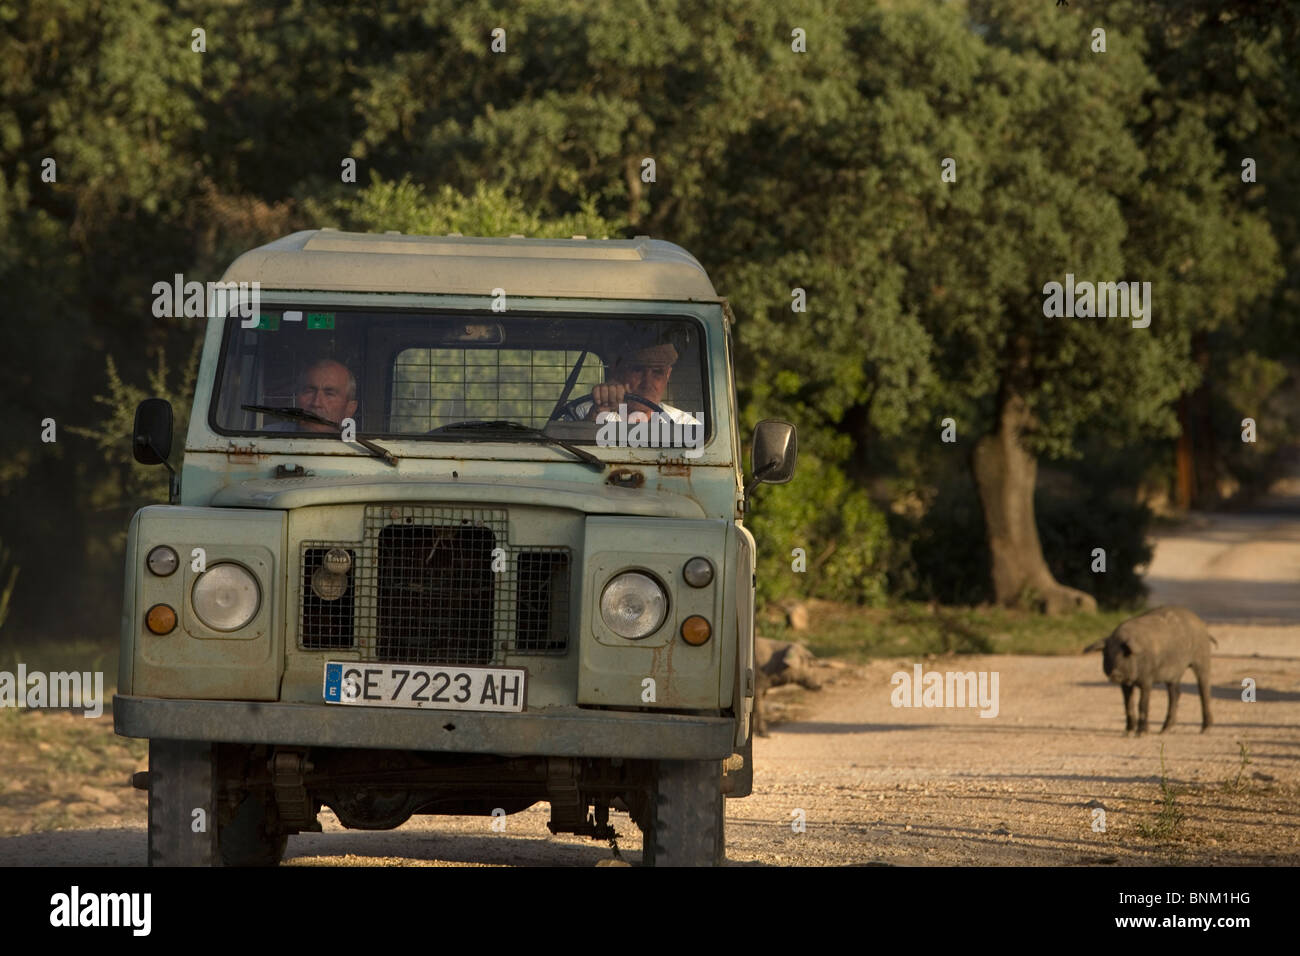 An old style Land Rover van drives along a country road on a farm of Spanish Iberian pigs in Prado del Rey, Cadiz, Spain Stock Photo